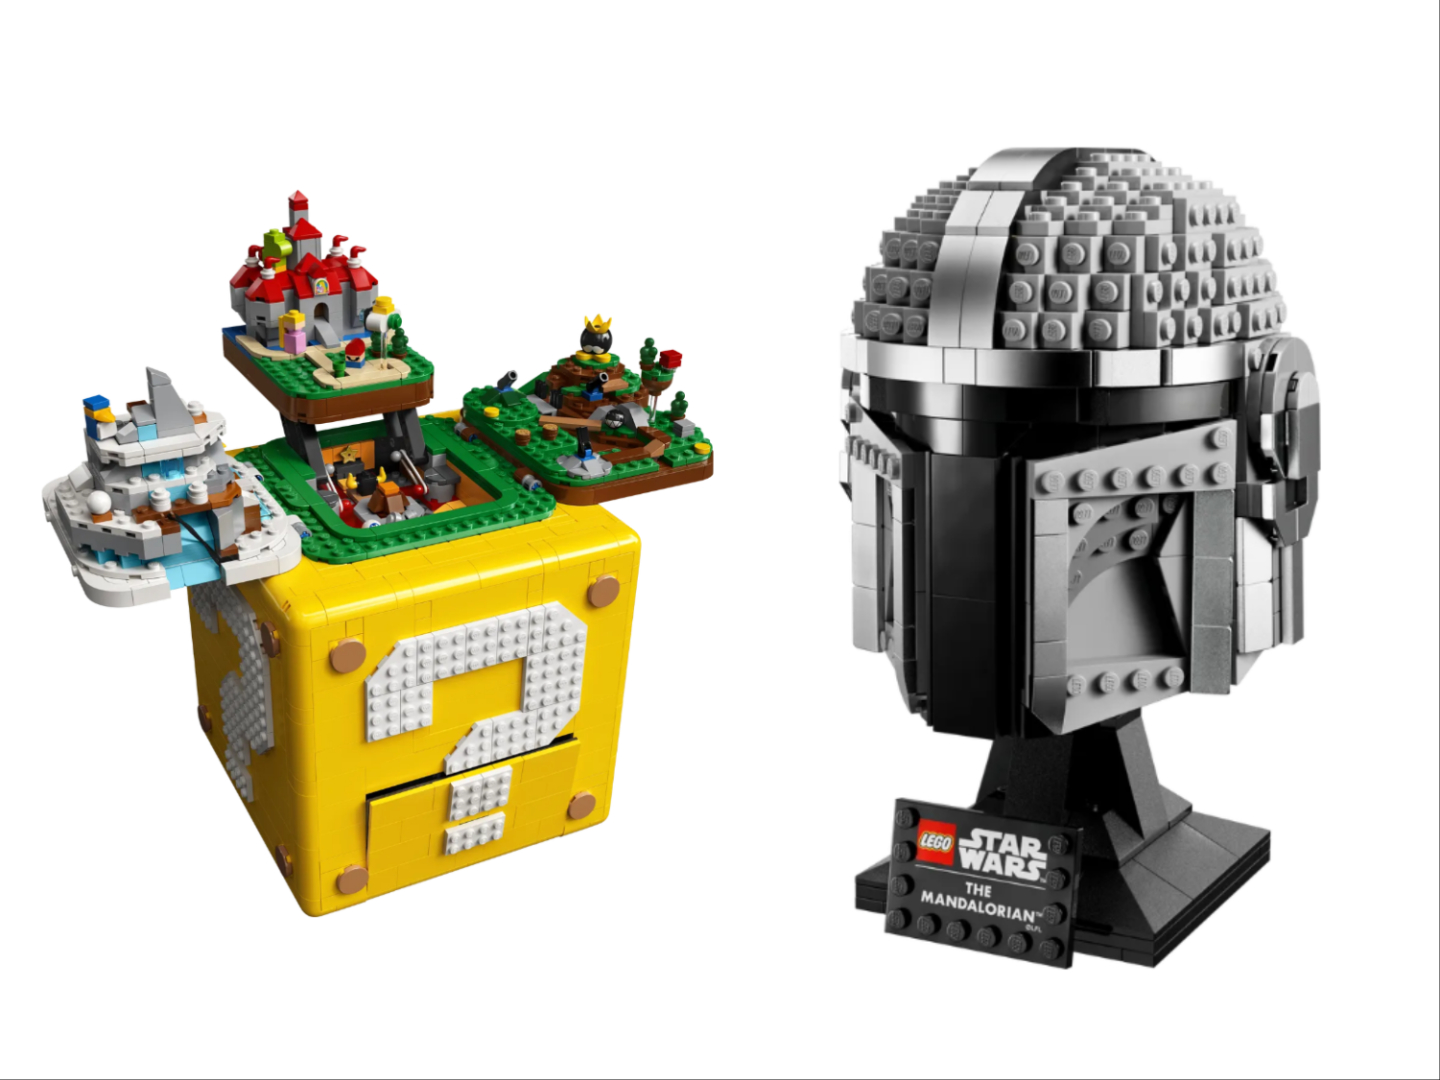 LEGO: up to preorder Lord of the Rivendell; Get deals on Disney, Marvel and more - mlive.com